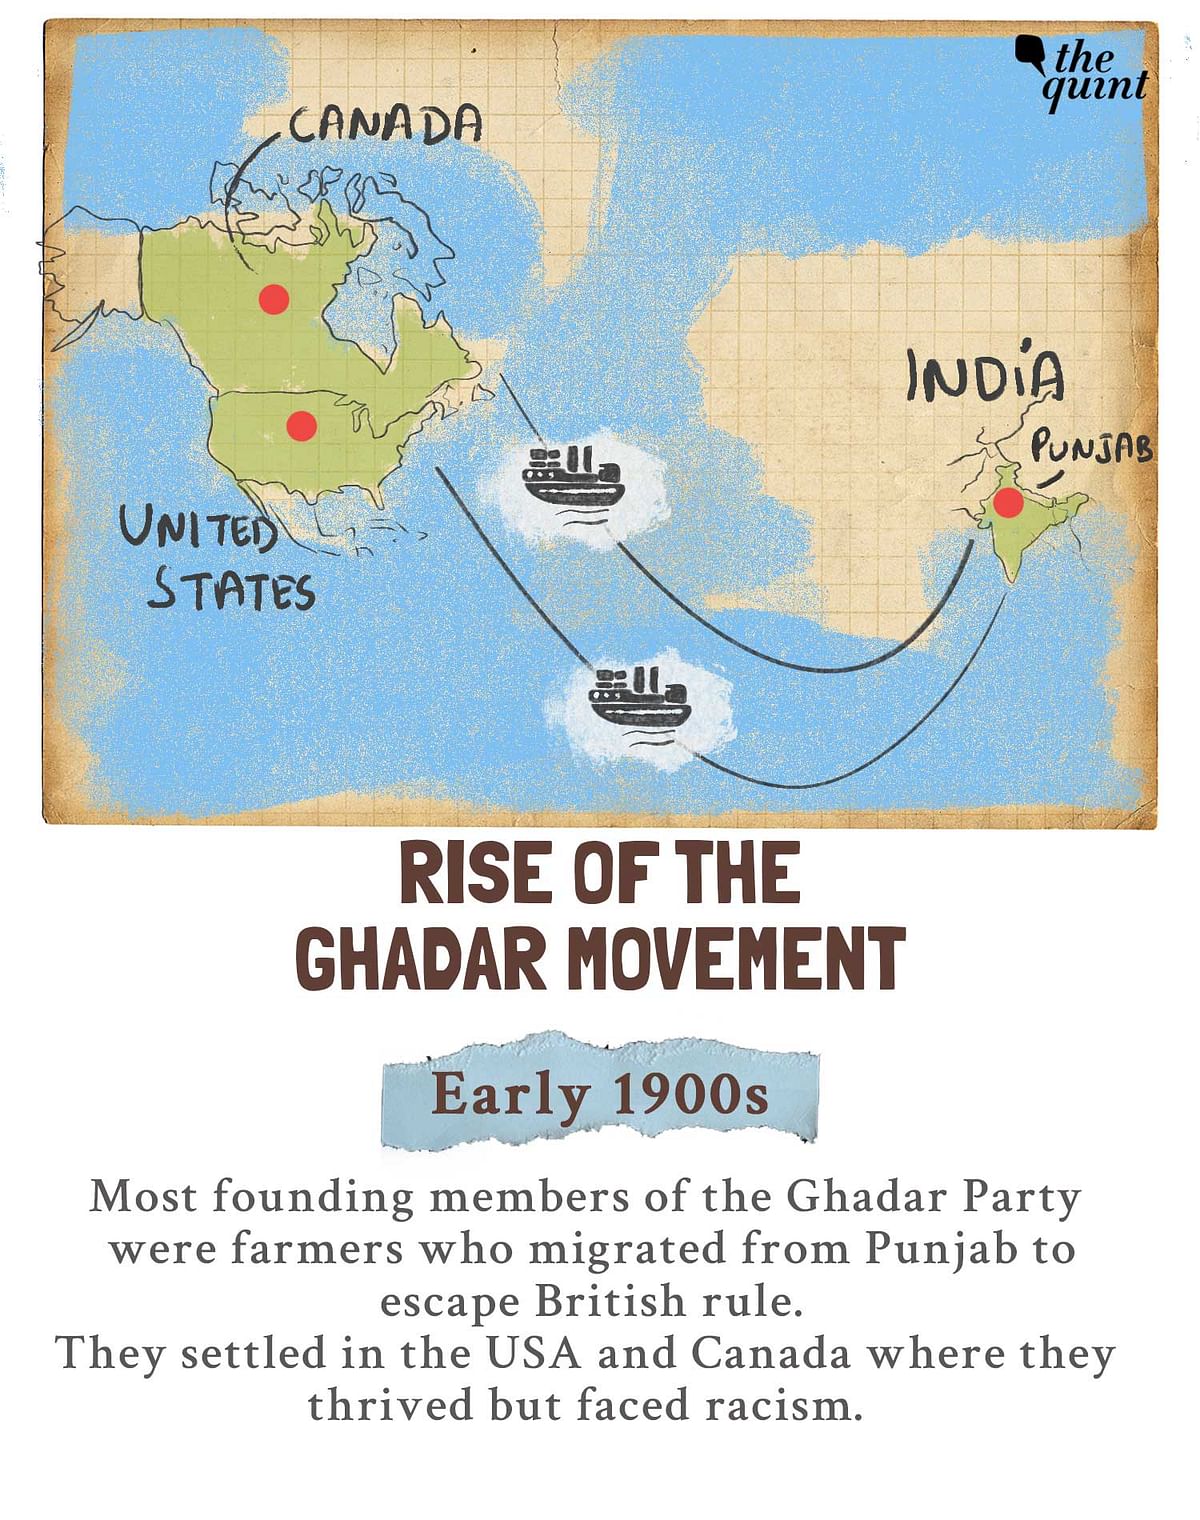 British tried all means – banned peaceful protests, passed draconian laws. But nothing could stop the Ghadar mutiny.